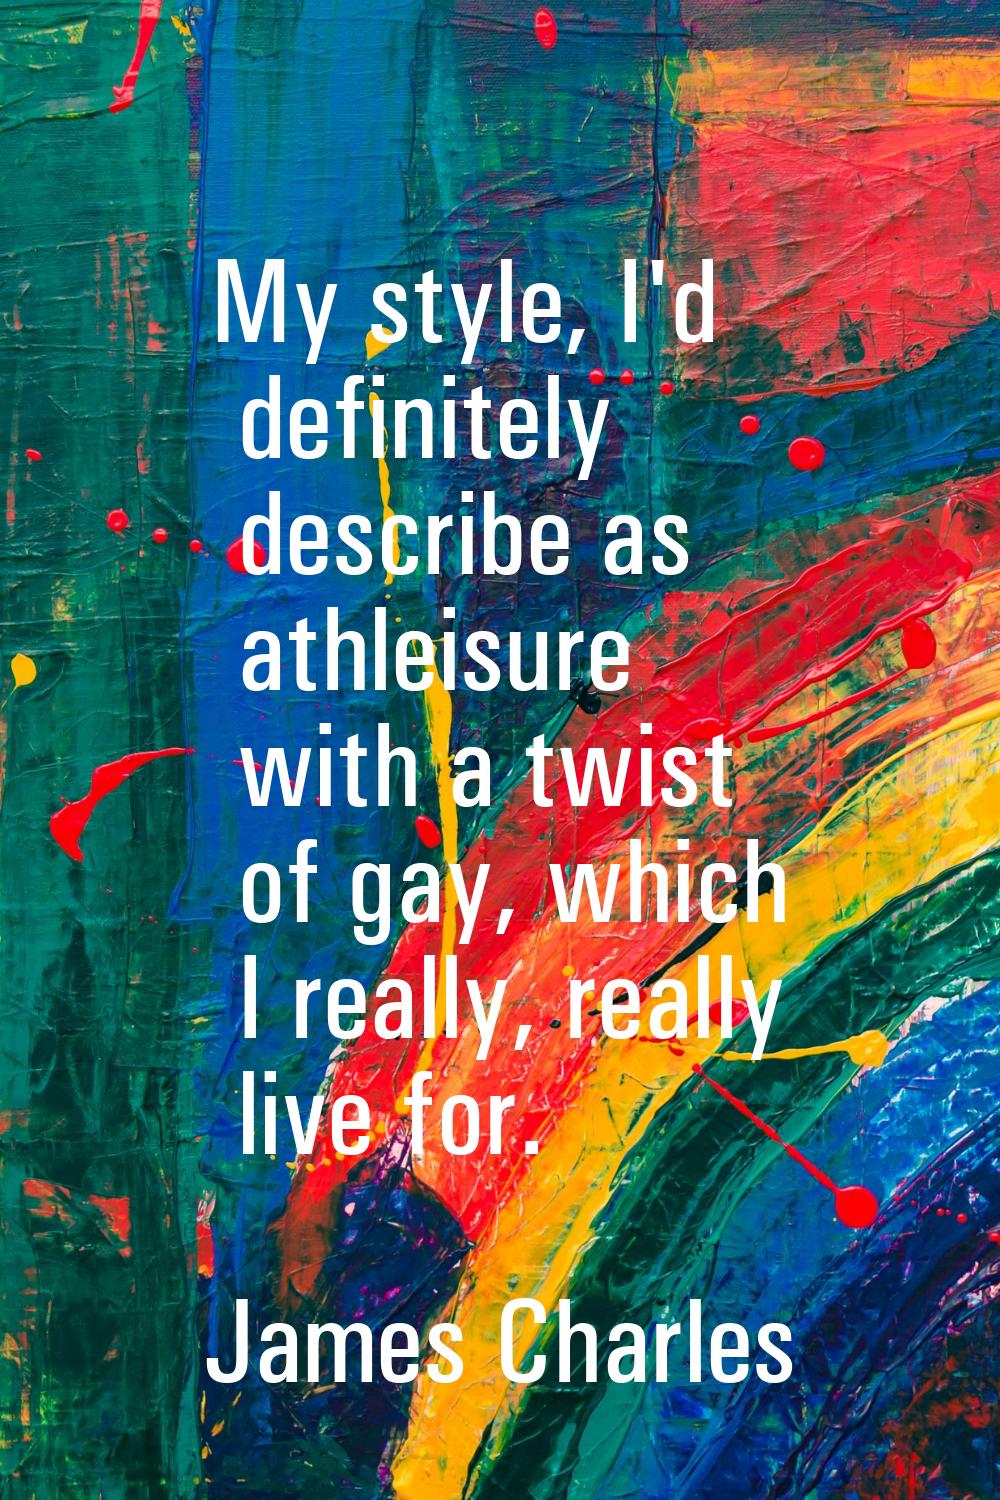 My style, I'd definitely describe as athleisure with a twist of gay, which I really, really live fo